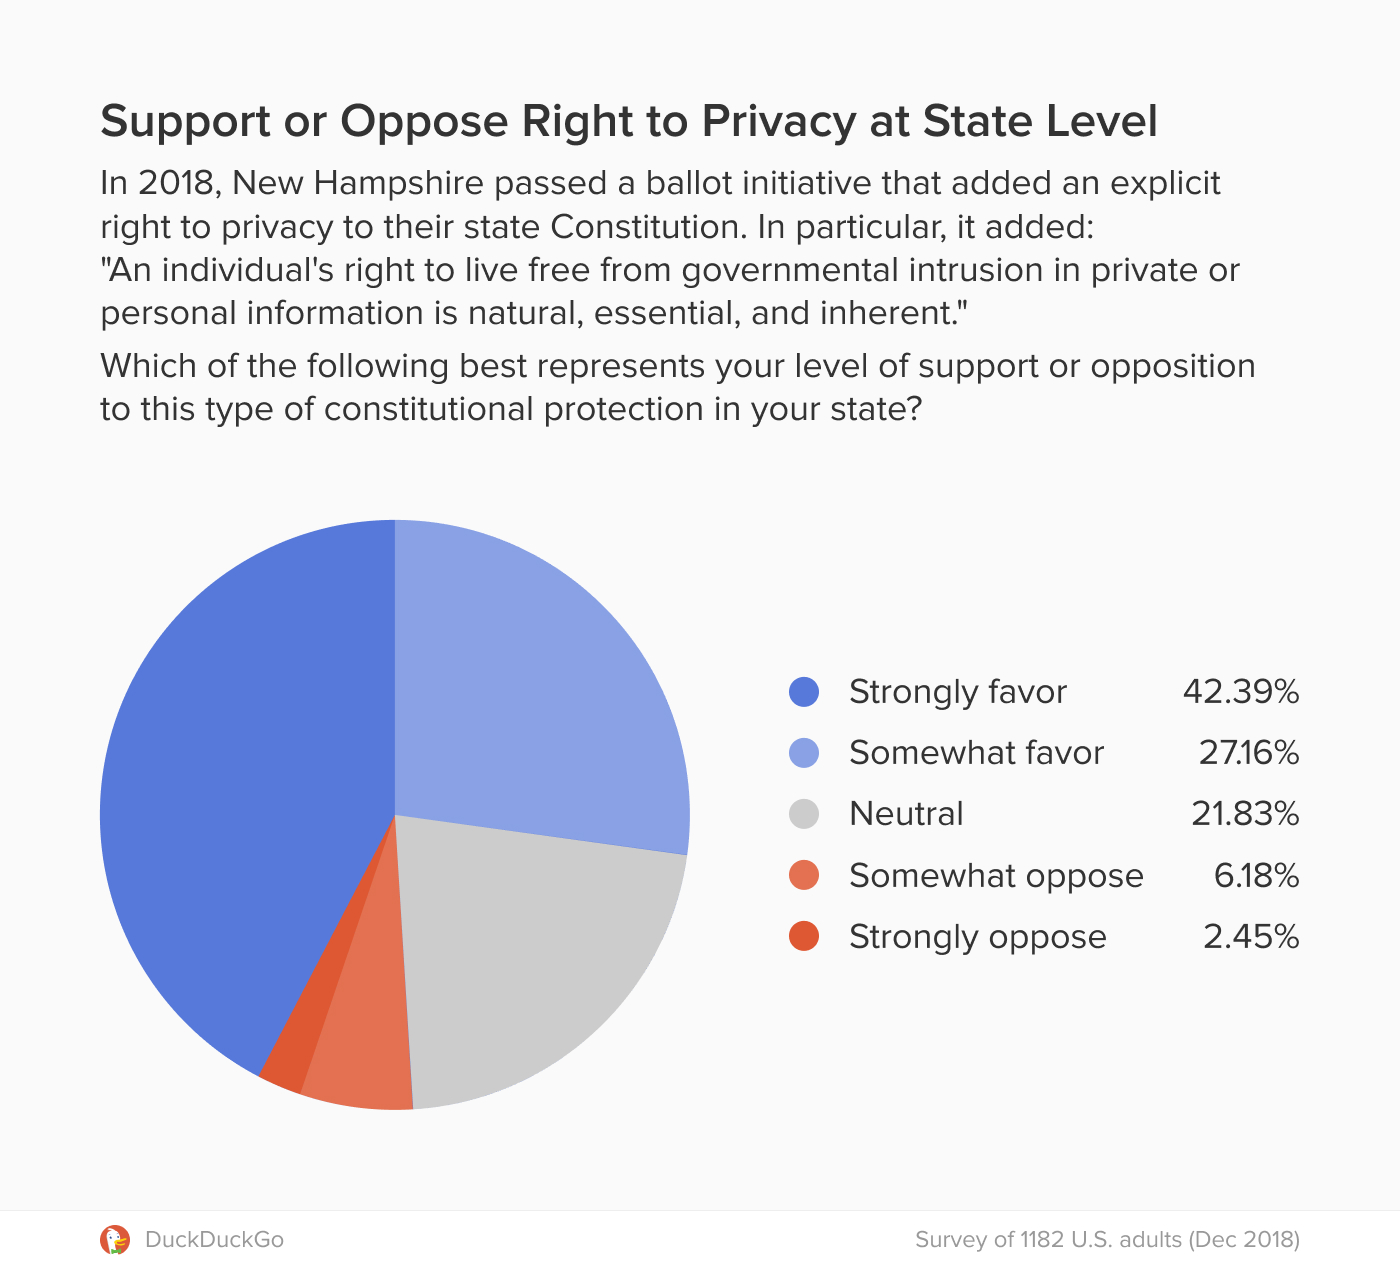 Graph showing support for Constitutional privacy protection at the state level in the U.S.